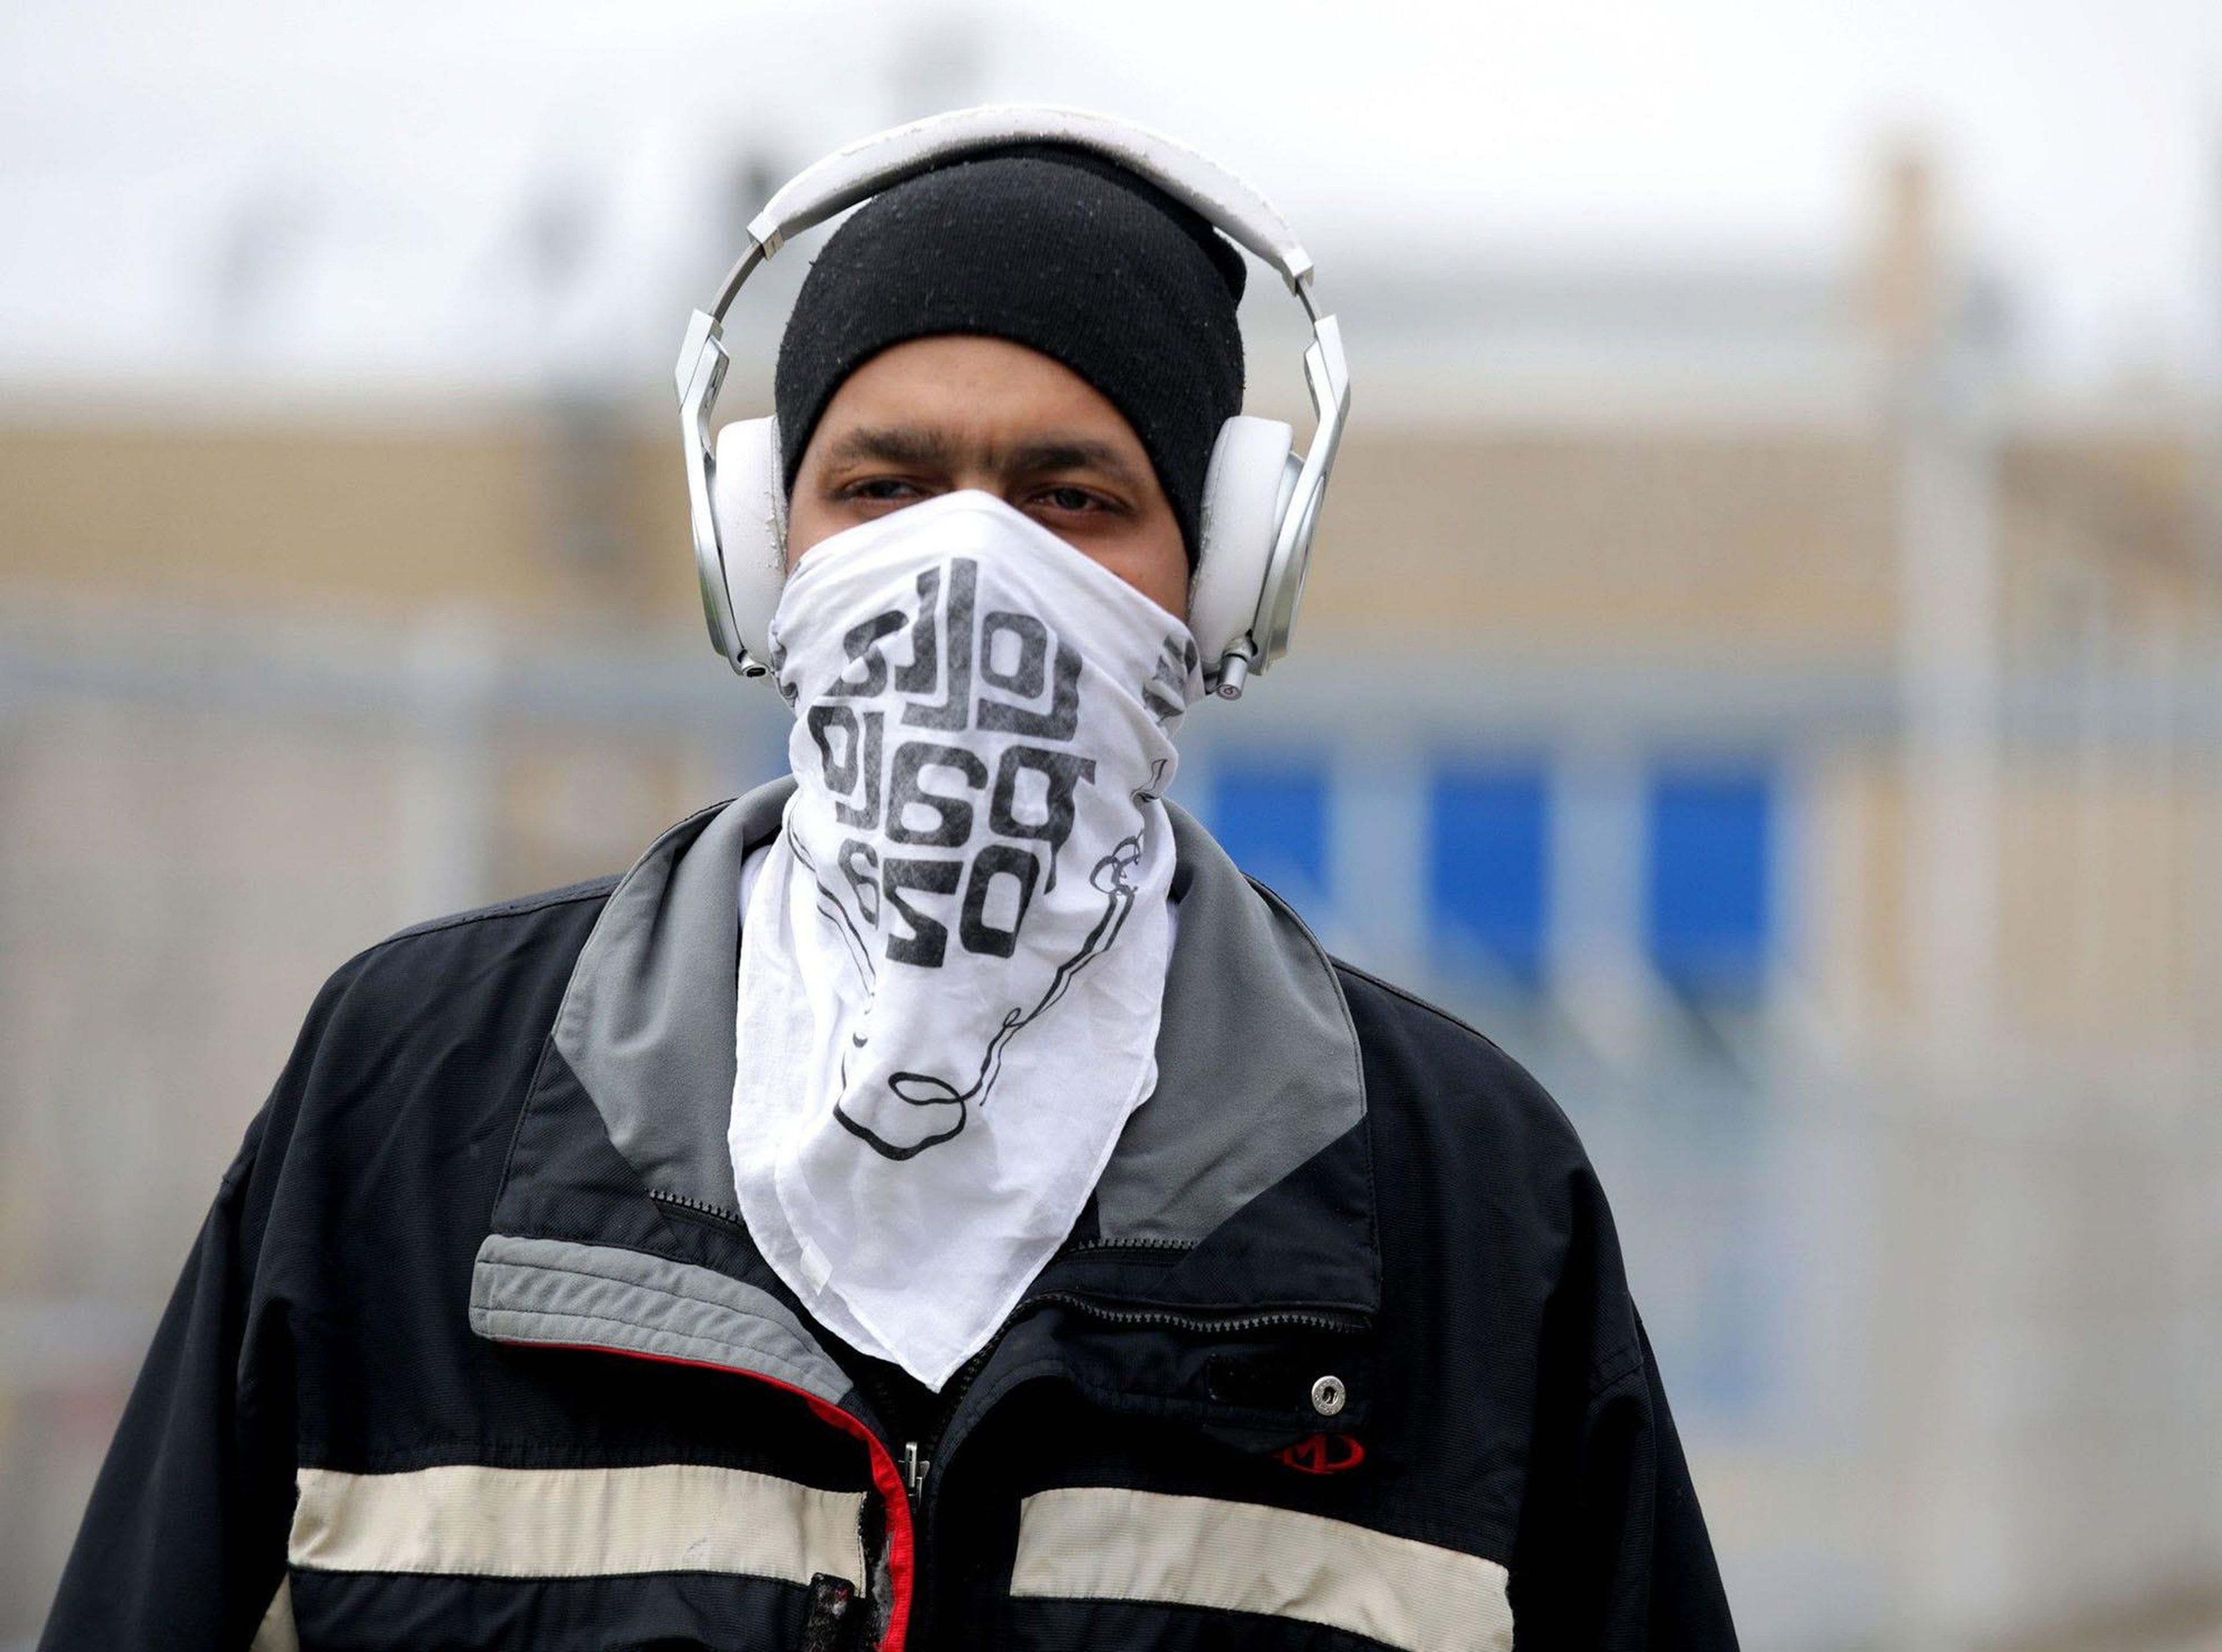 Kevin Houston uses a bandana to cover his face on April 23, 2020, in Evanston, Illinois. Stacey Wescott/Chicago Tribune/Tribune News Service/Getty Images